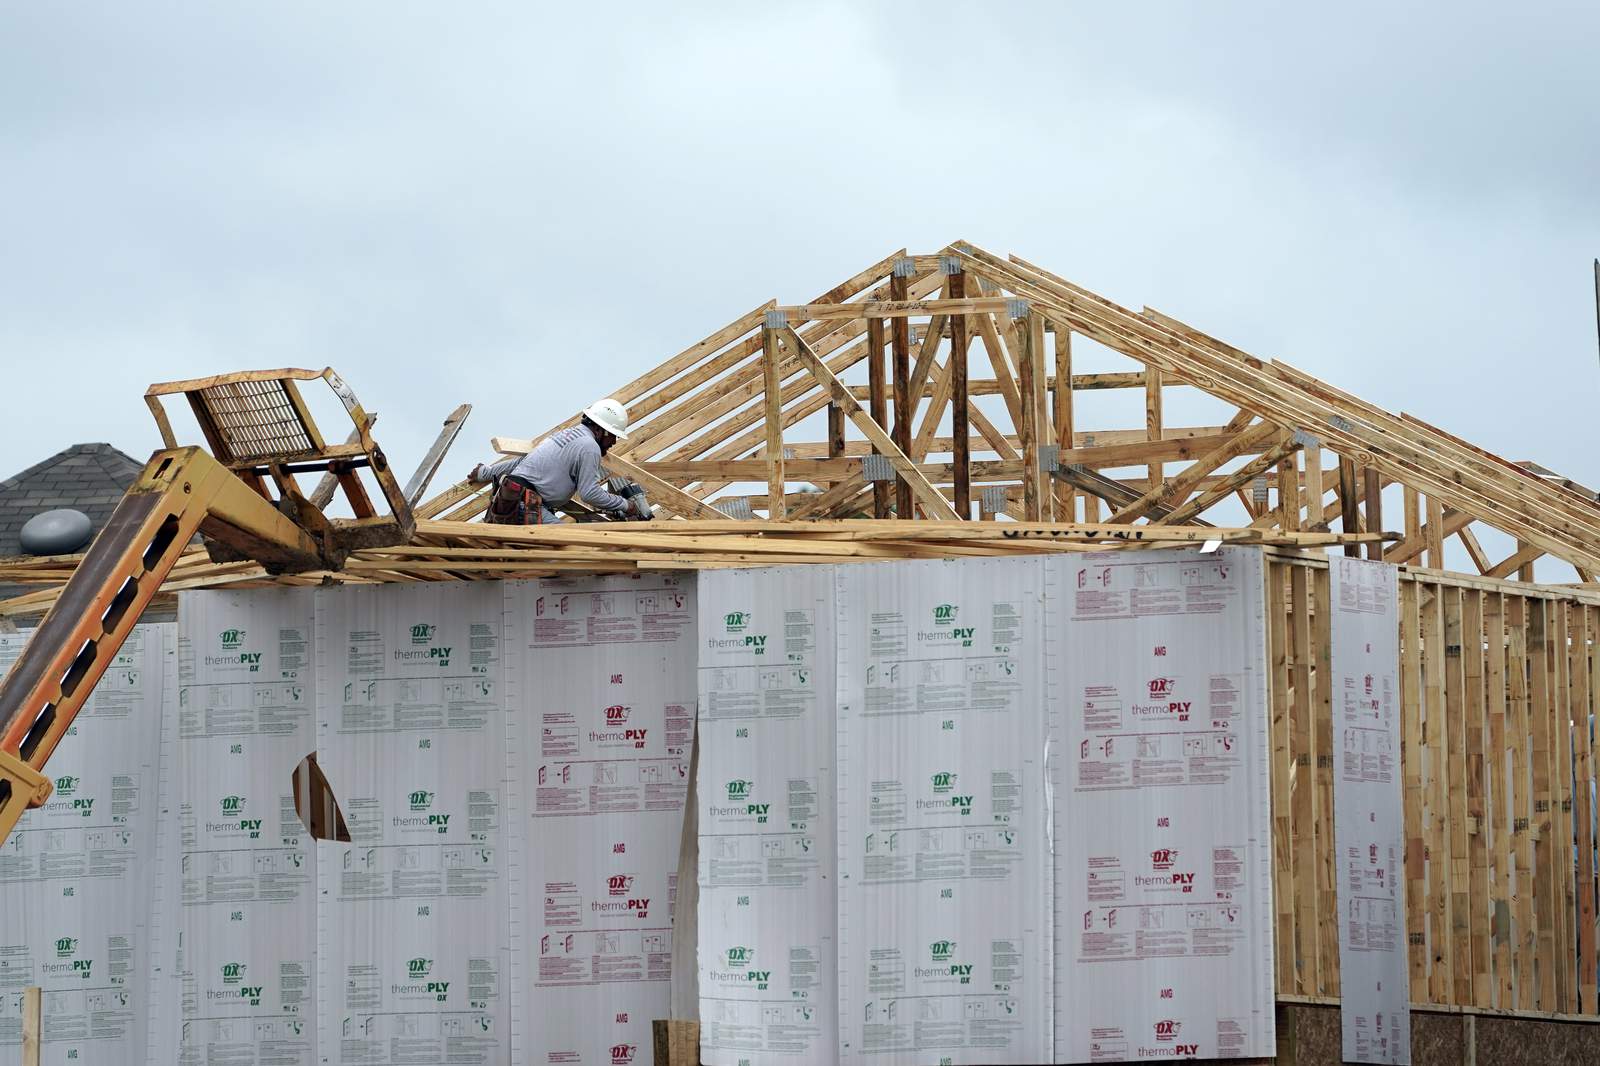 August construction spending up 1.4%, led by home building